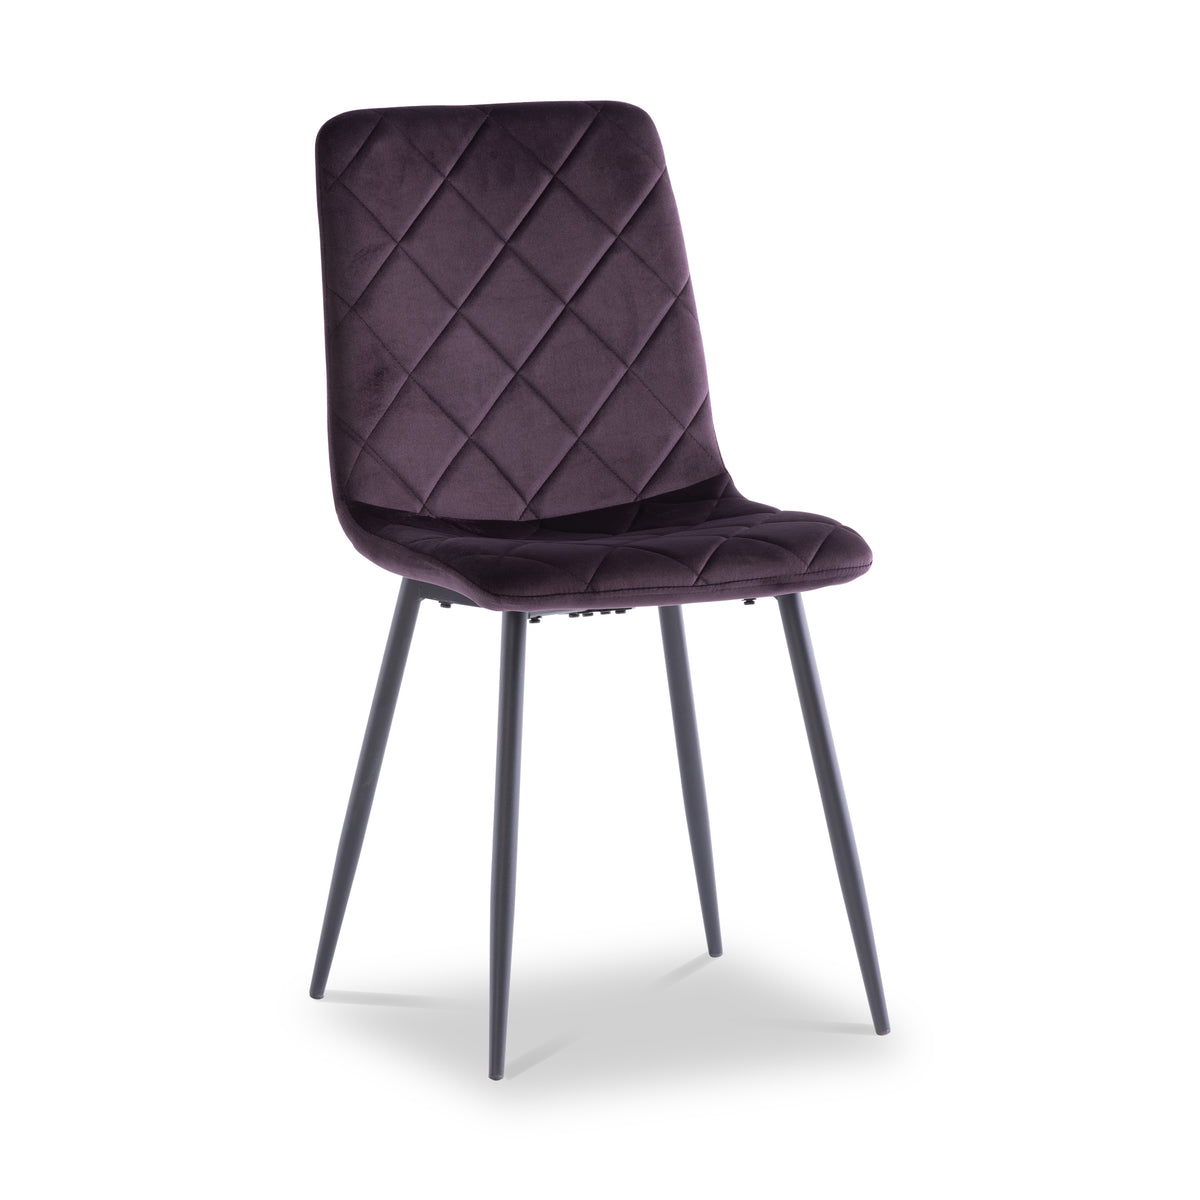 Lois Purple Velvet Quilted Back Dining Chair from Roseland Furniture